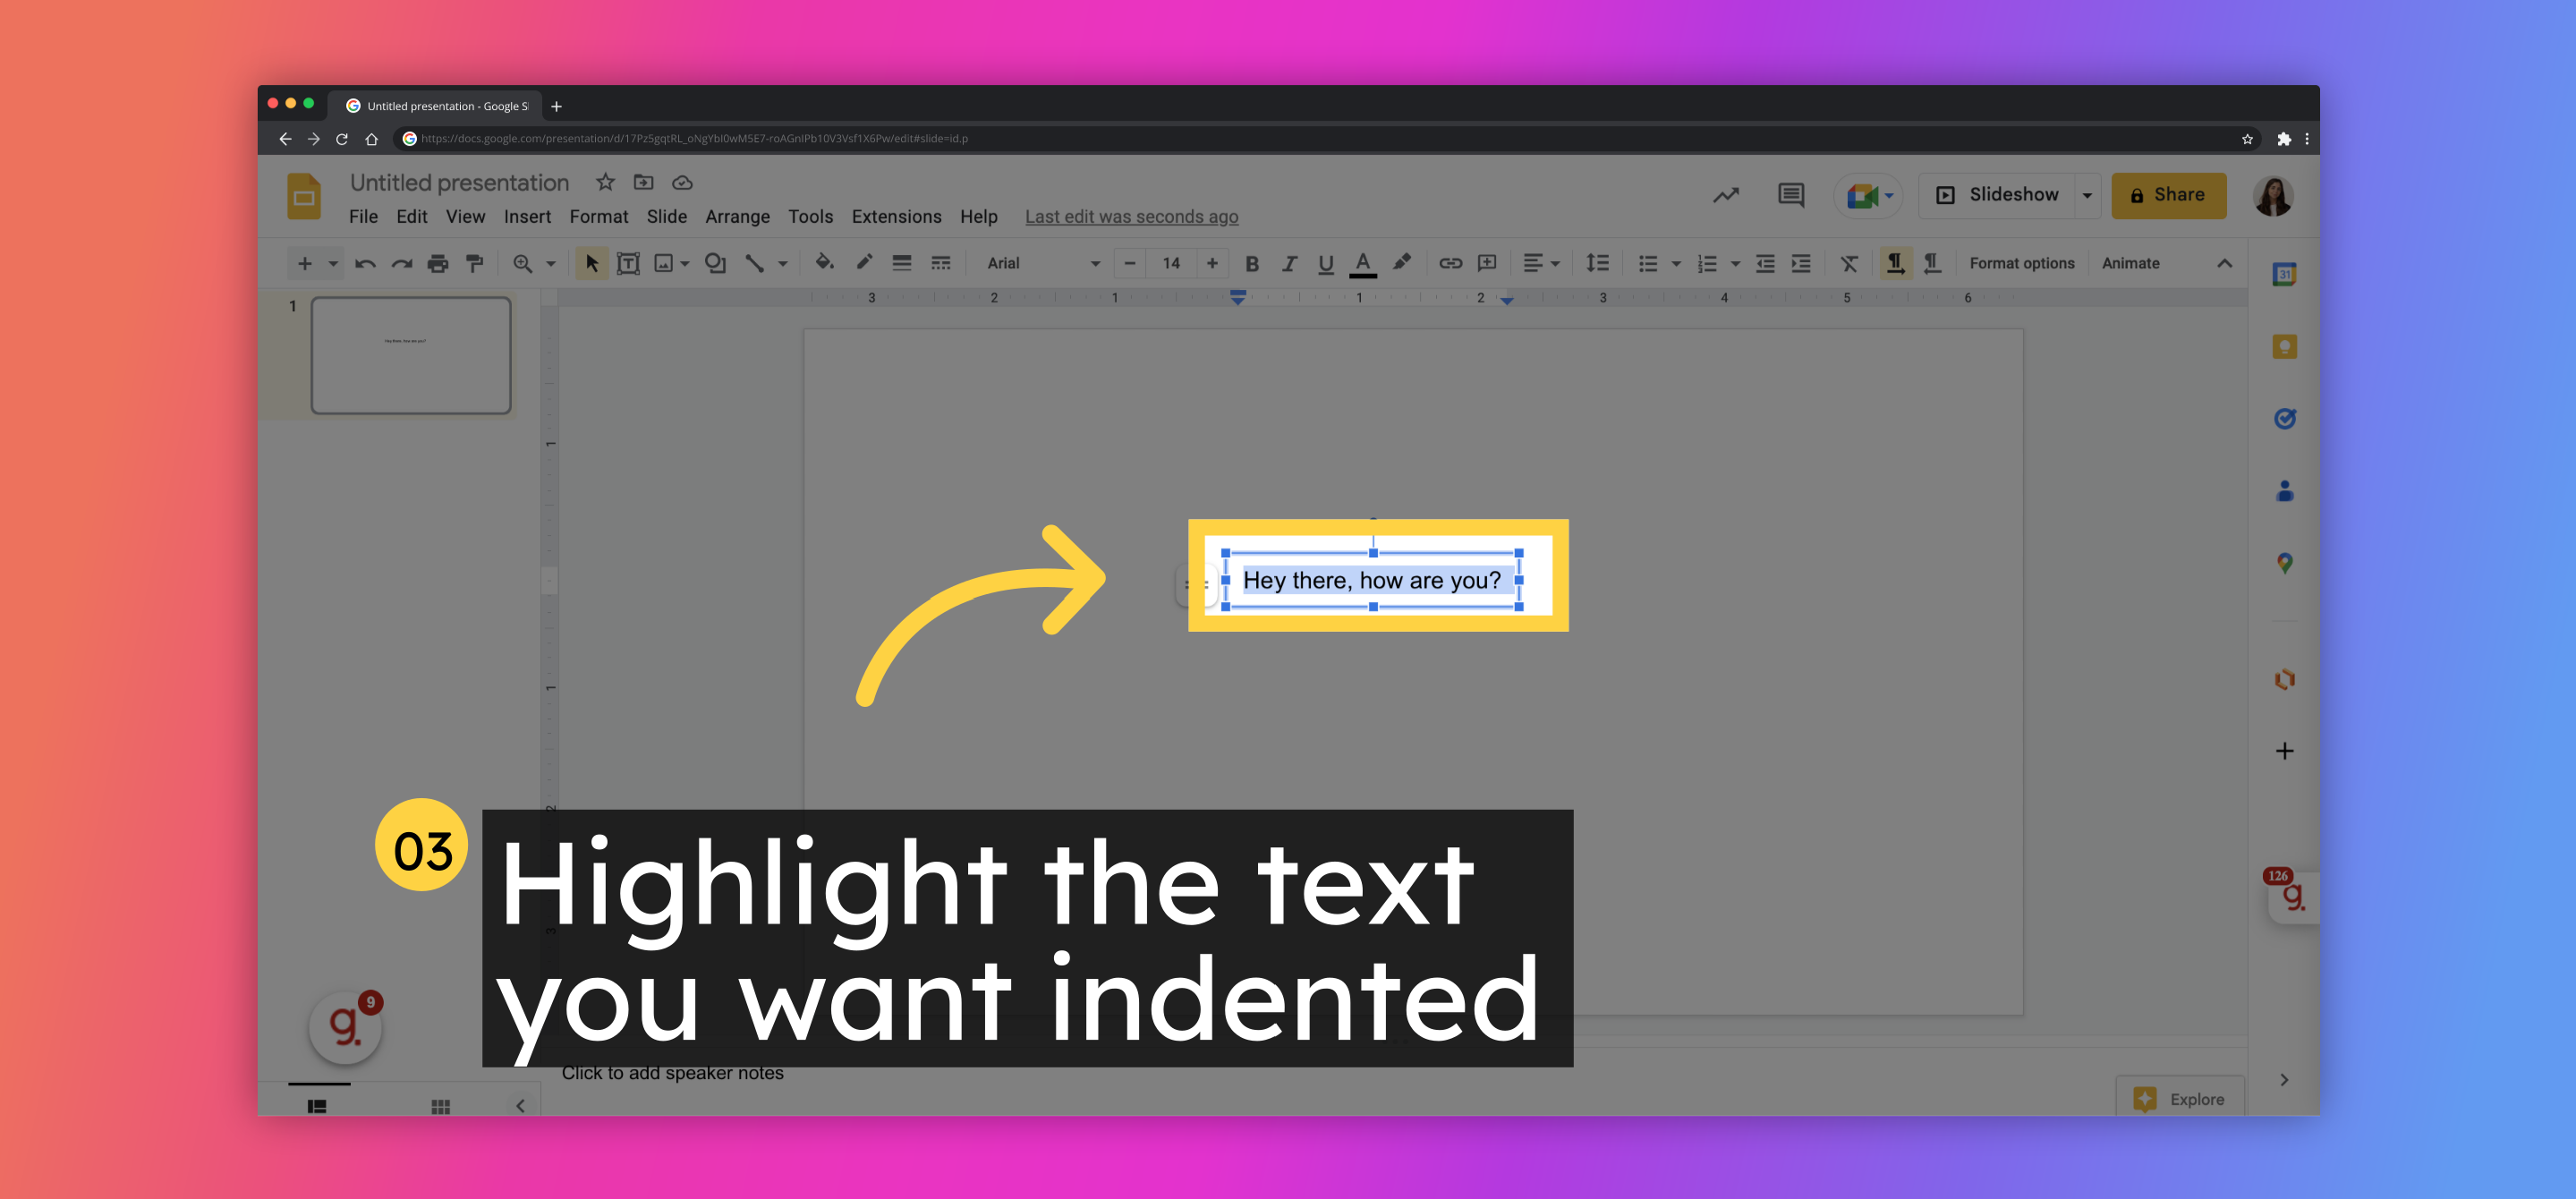 Highlight the text you want indented